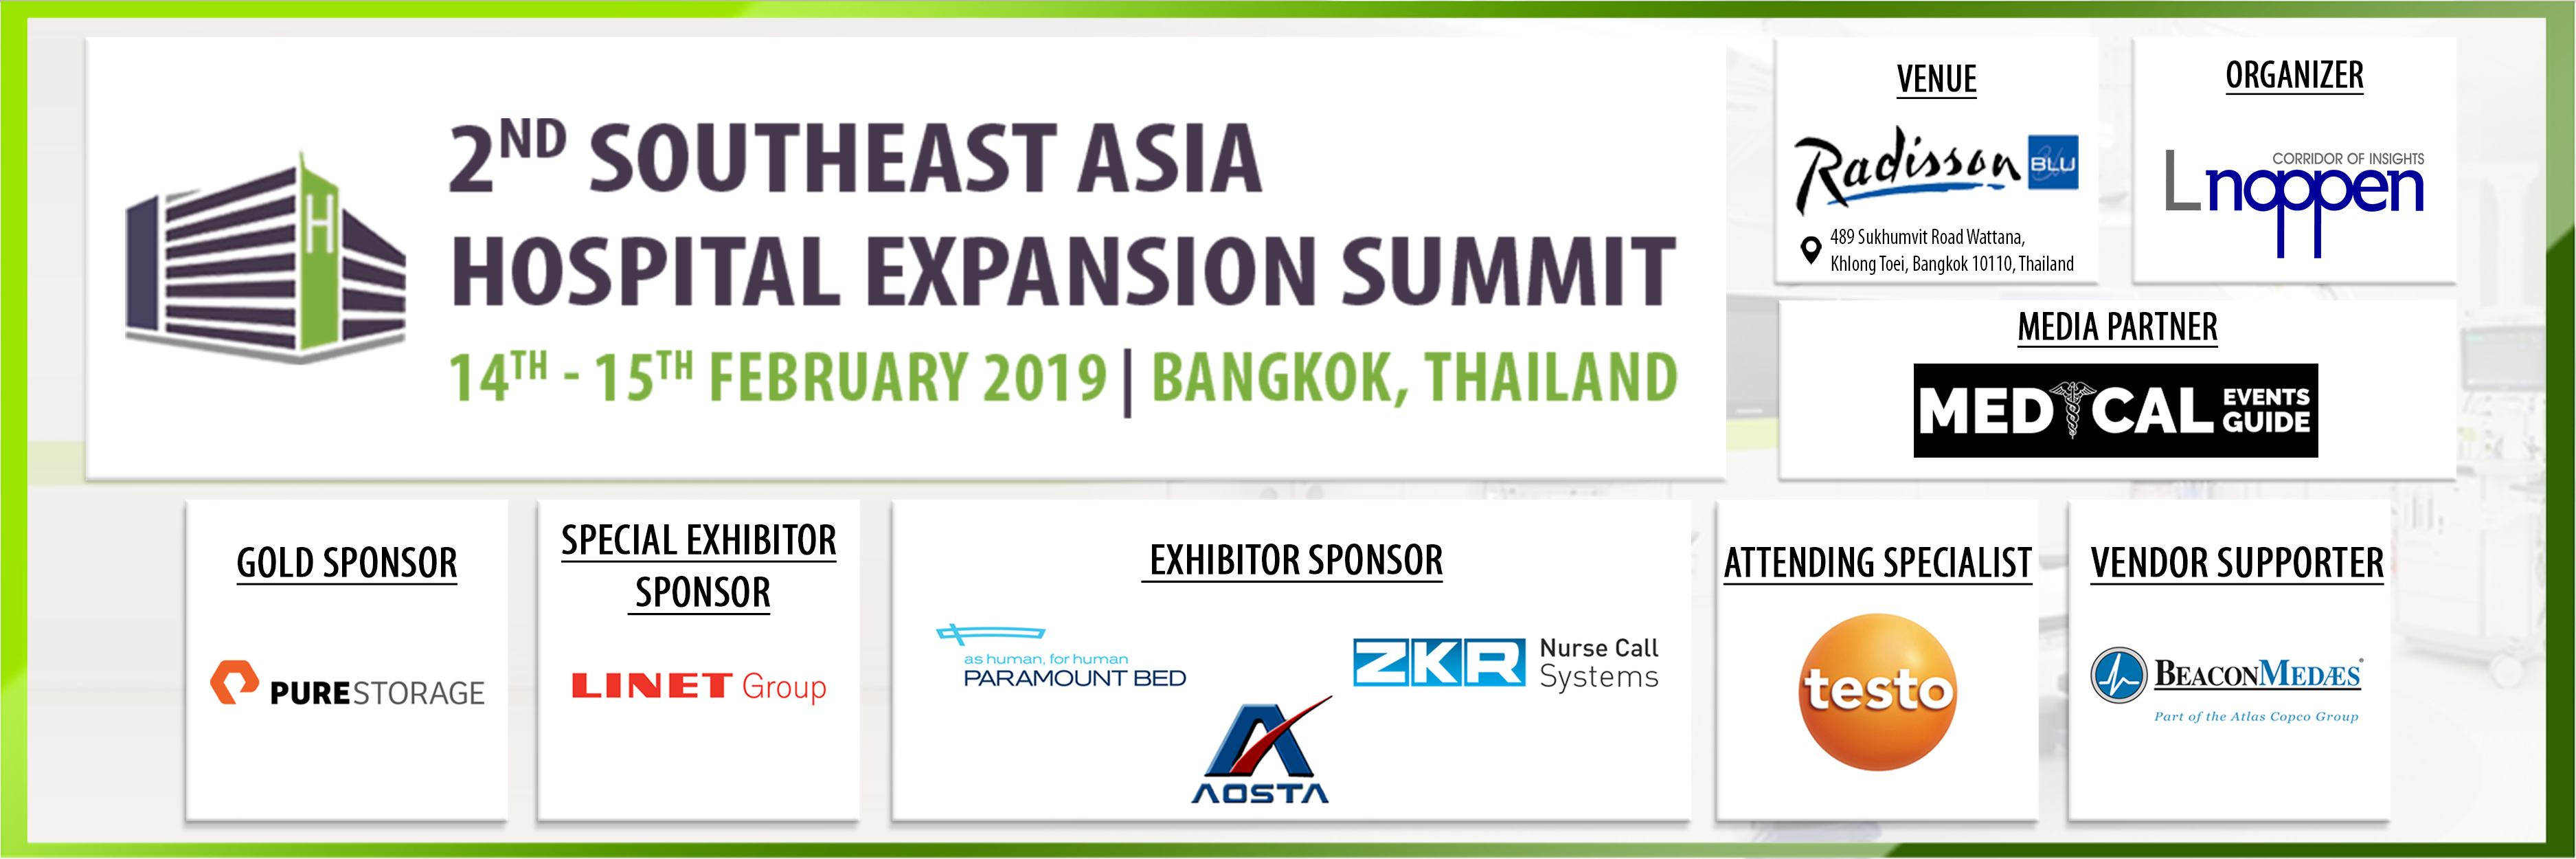 Photos of 2nd Southeast Asia Hospital Expansion Summit